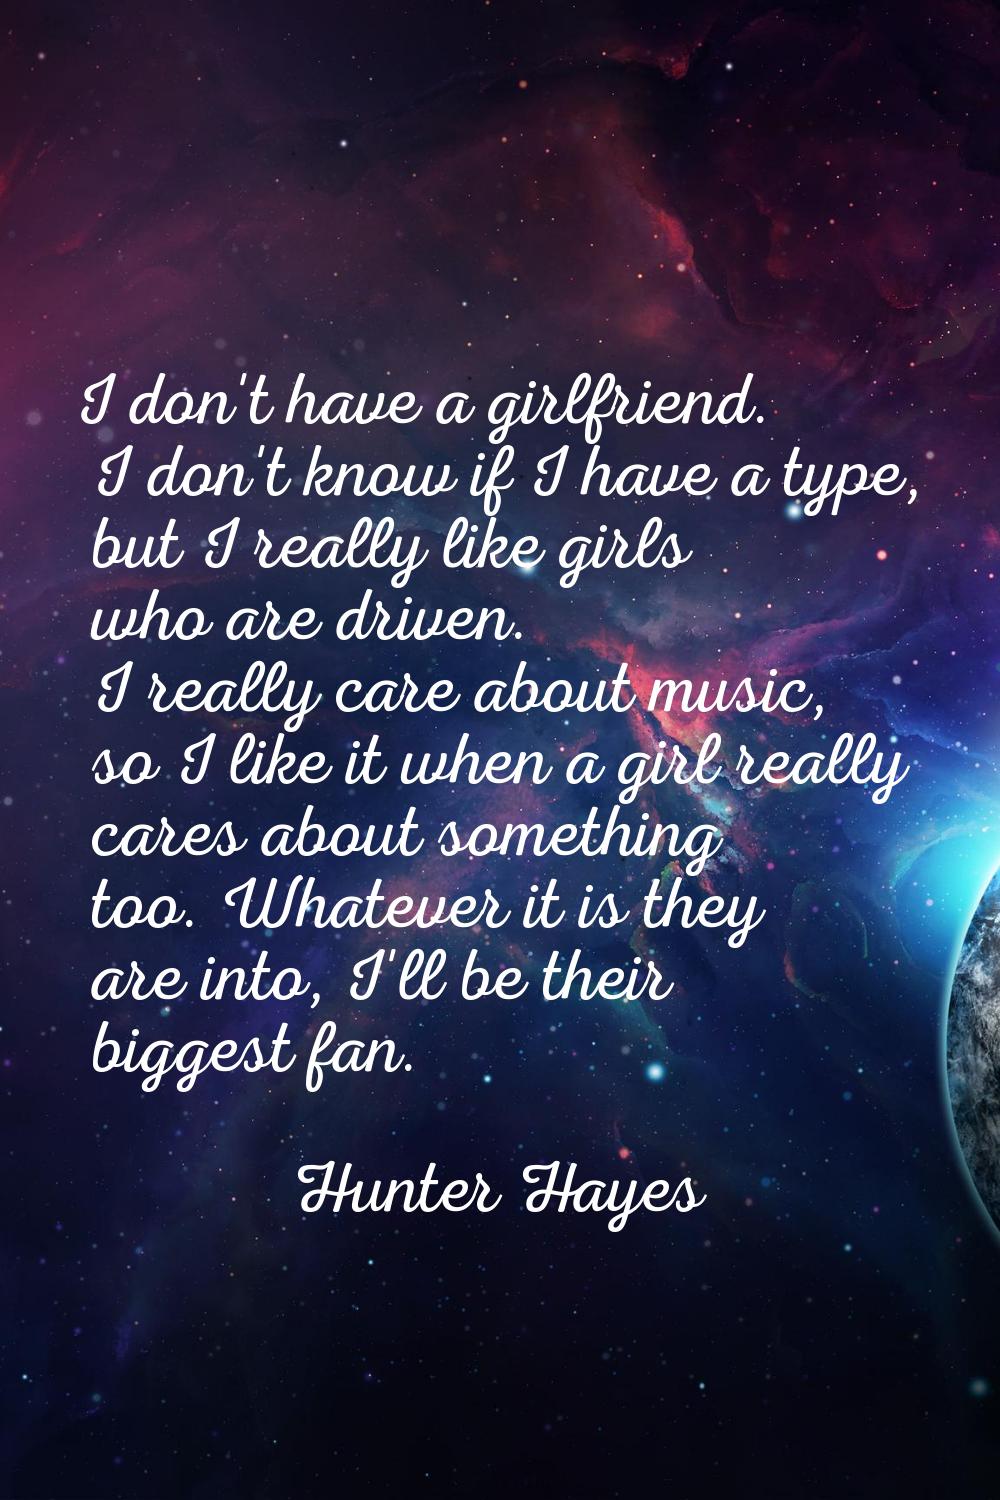 I don't have a girlfriend. I don't know if I have a type, but I really like girls who are driven. I